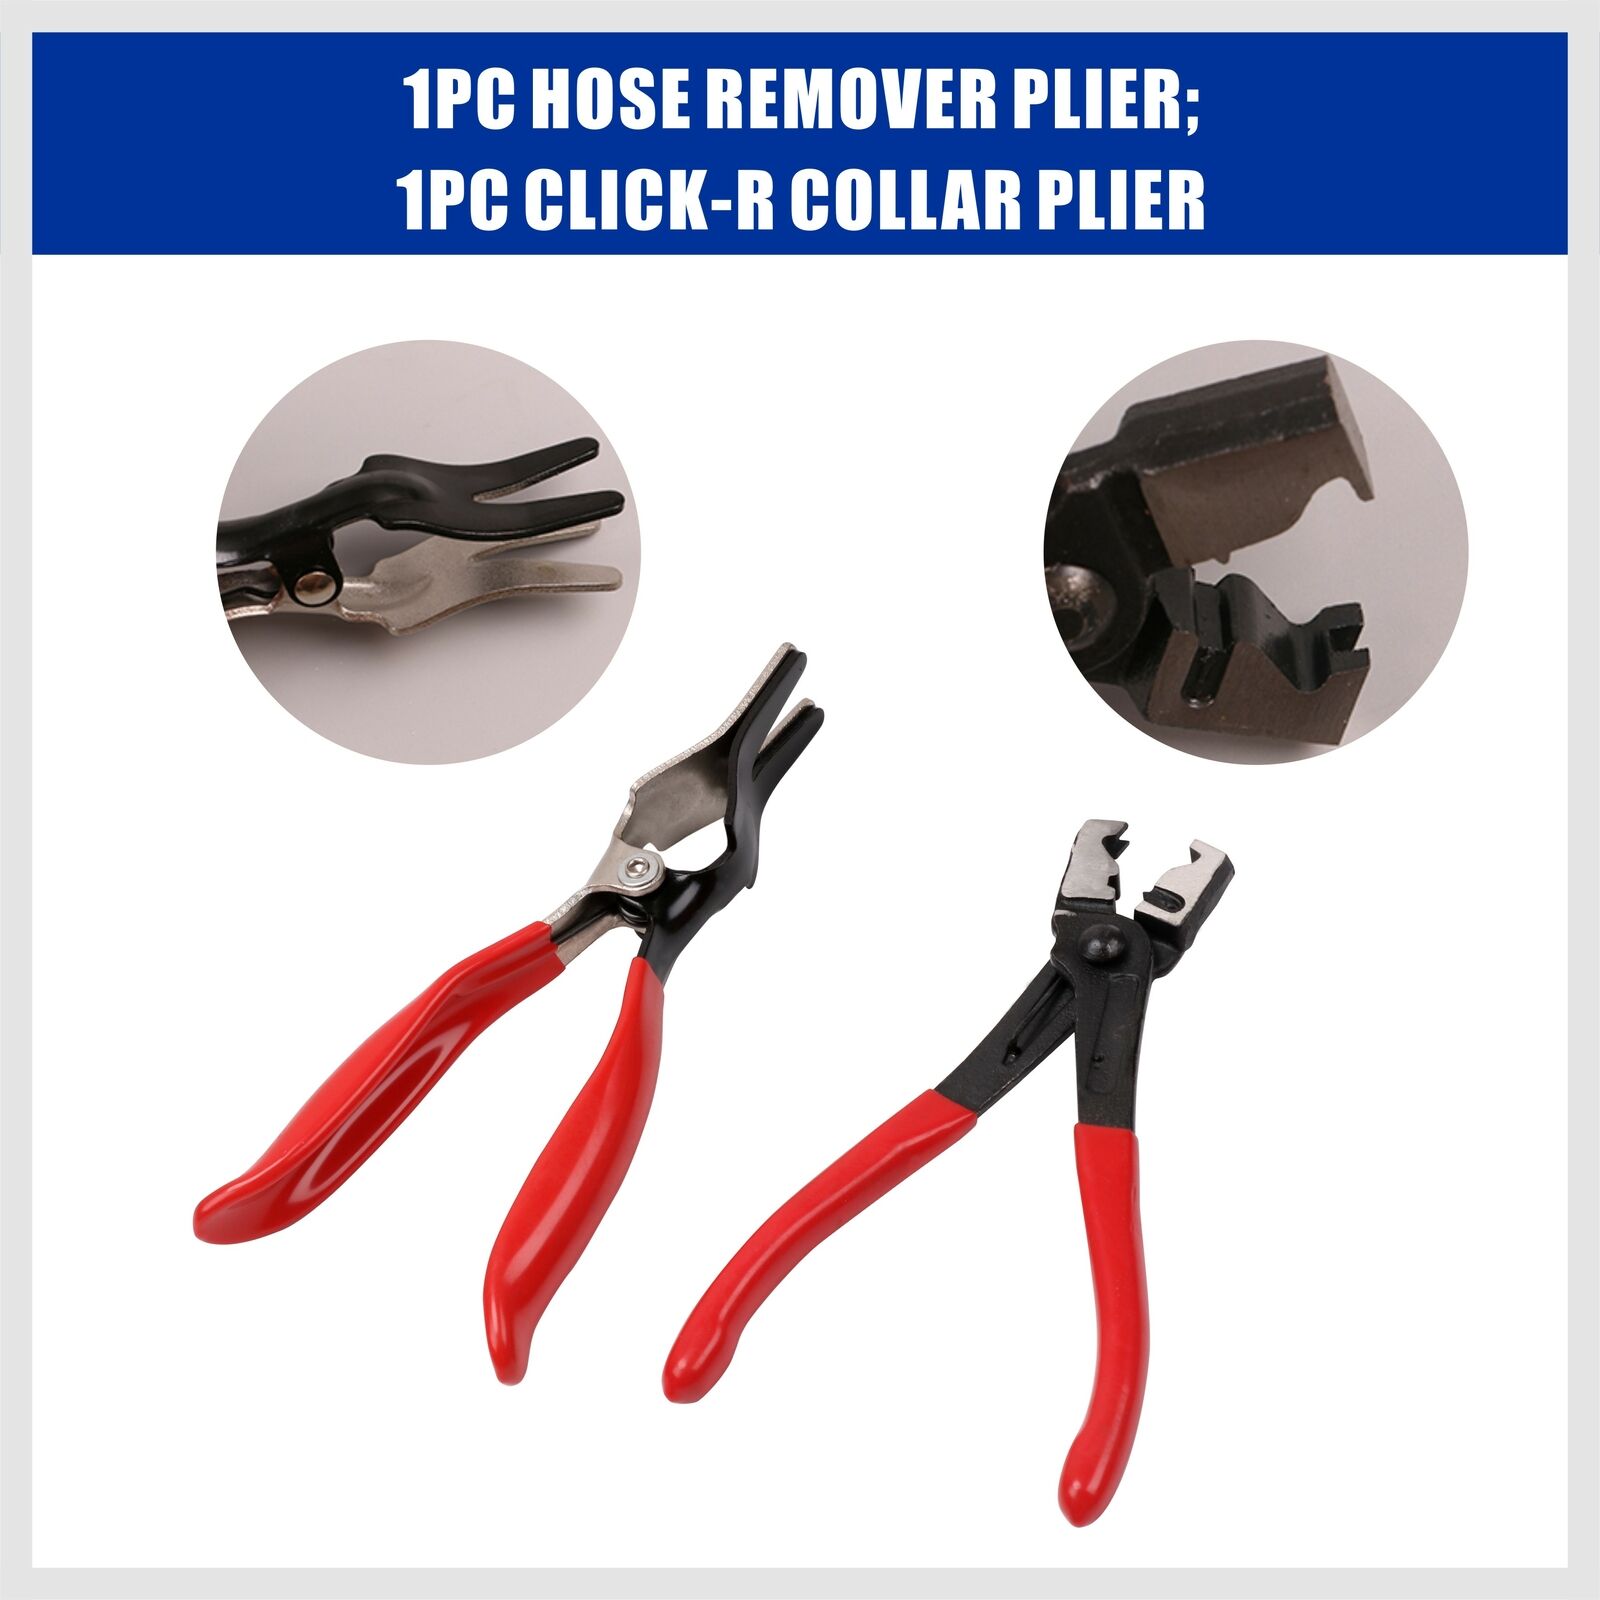 Comprehensive 9-Piece Hose Clamp Pliers Kit - Includes Swivel Jaw, Flat Band, Angled Pliers, and Additional Tools for Automotive Repair